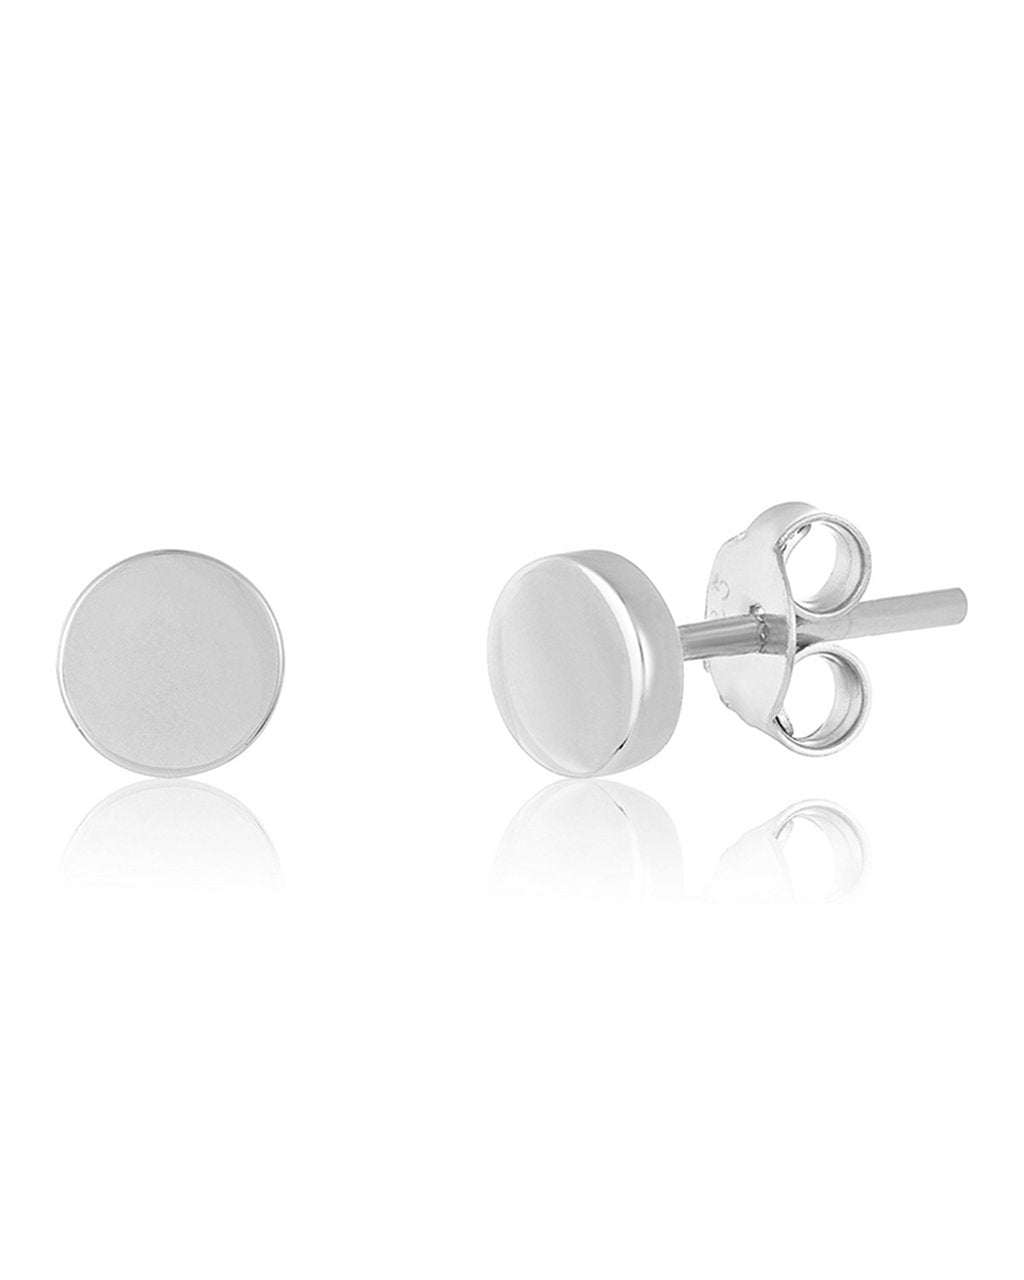 Sterling Silver Essential Earring Set of 3 - Sterling Forever